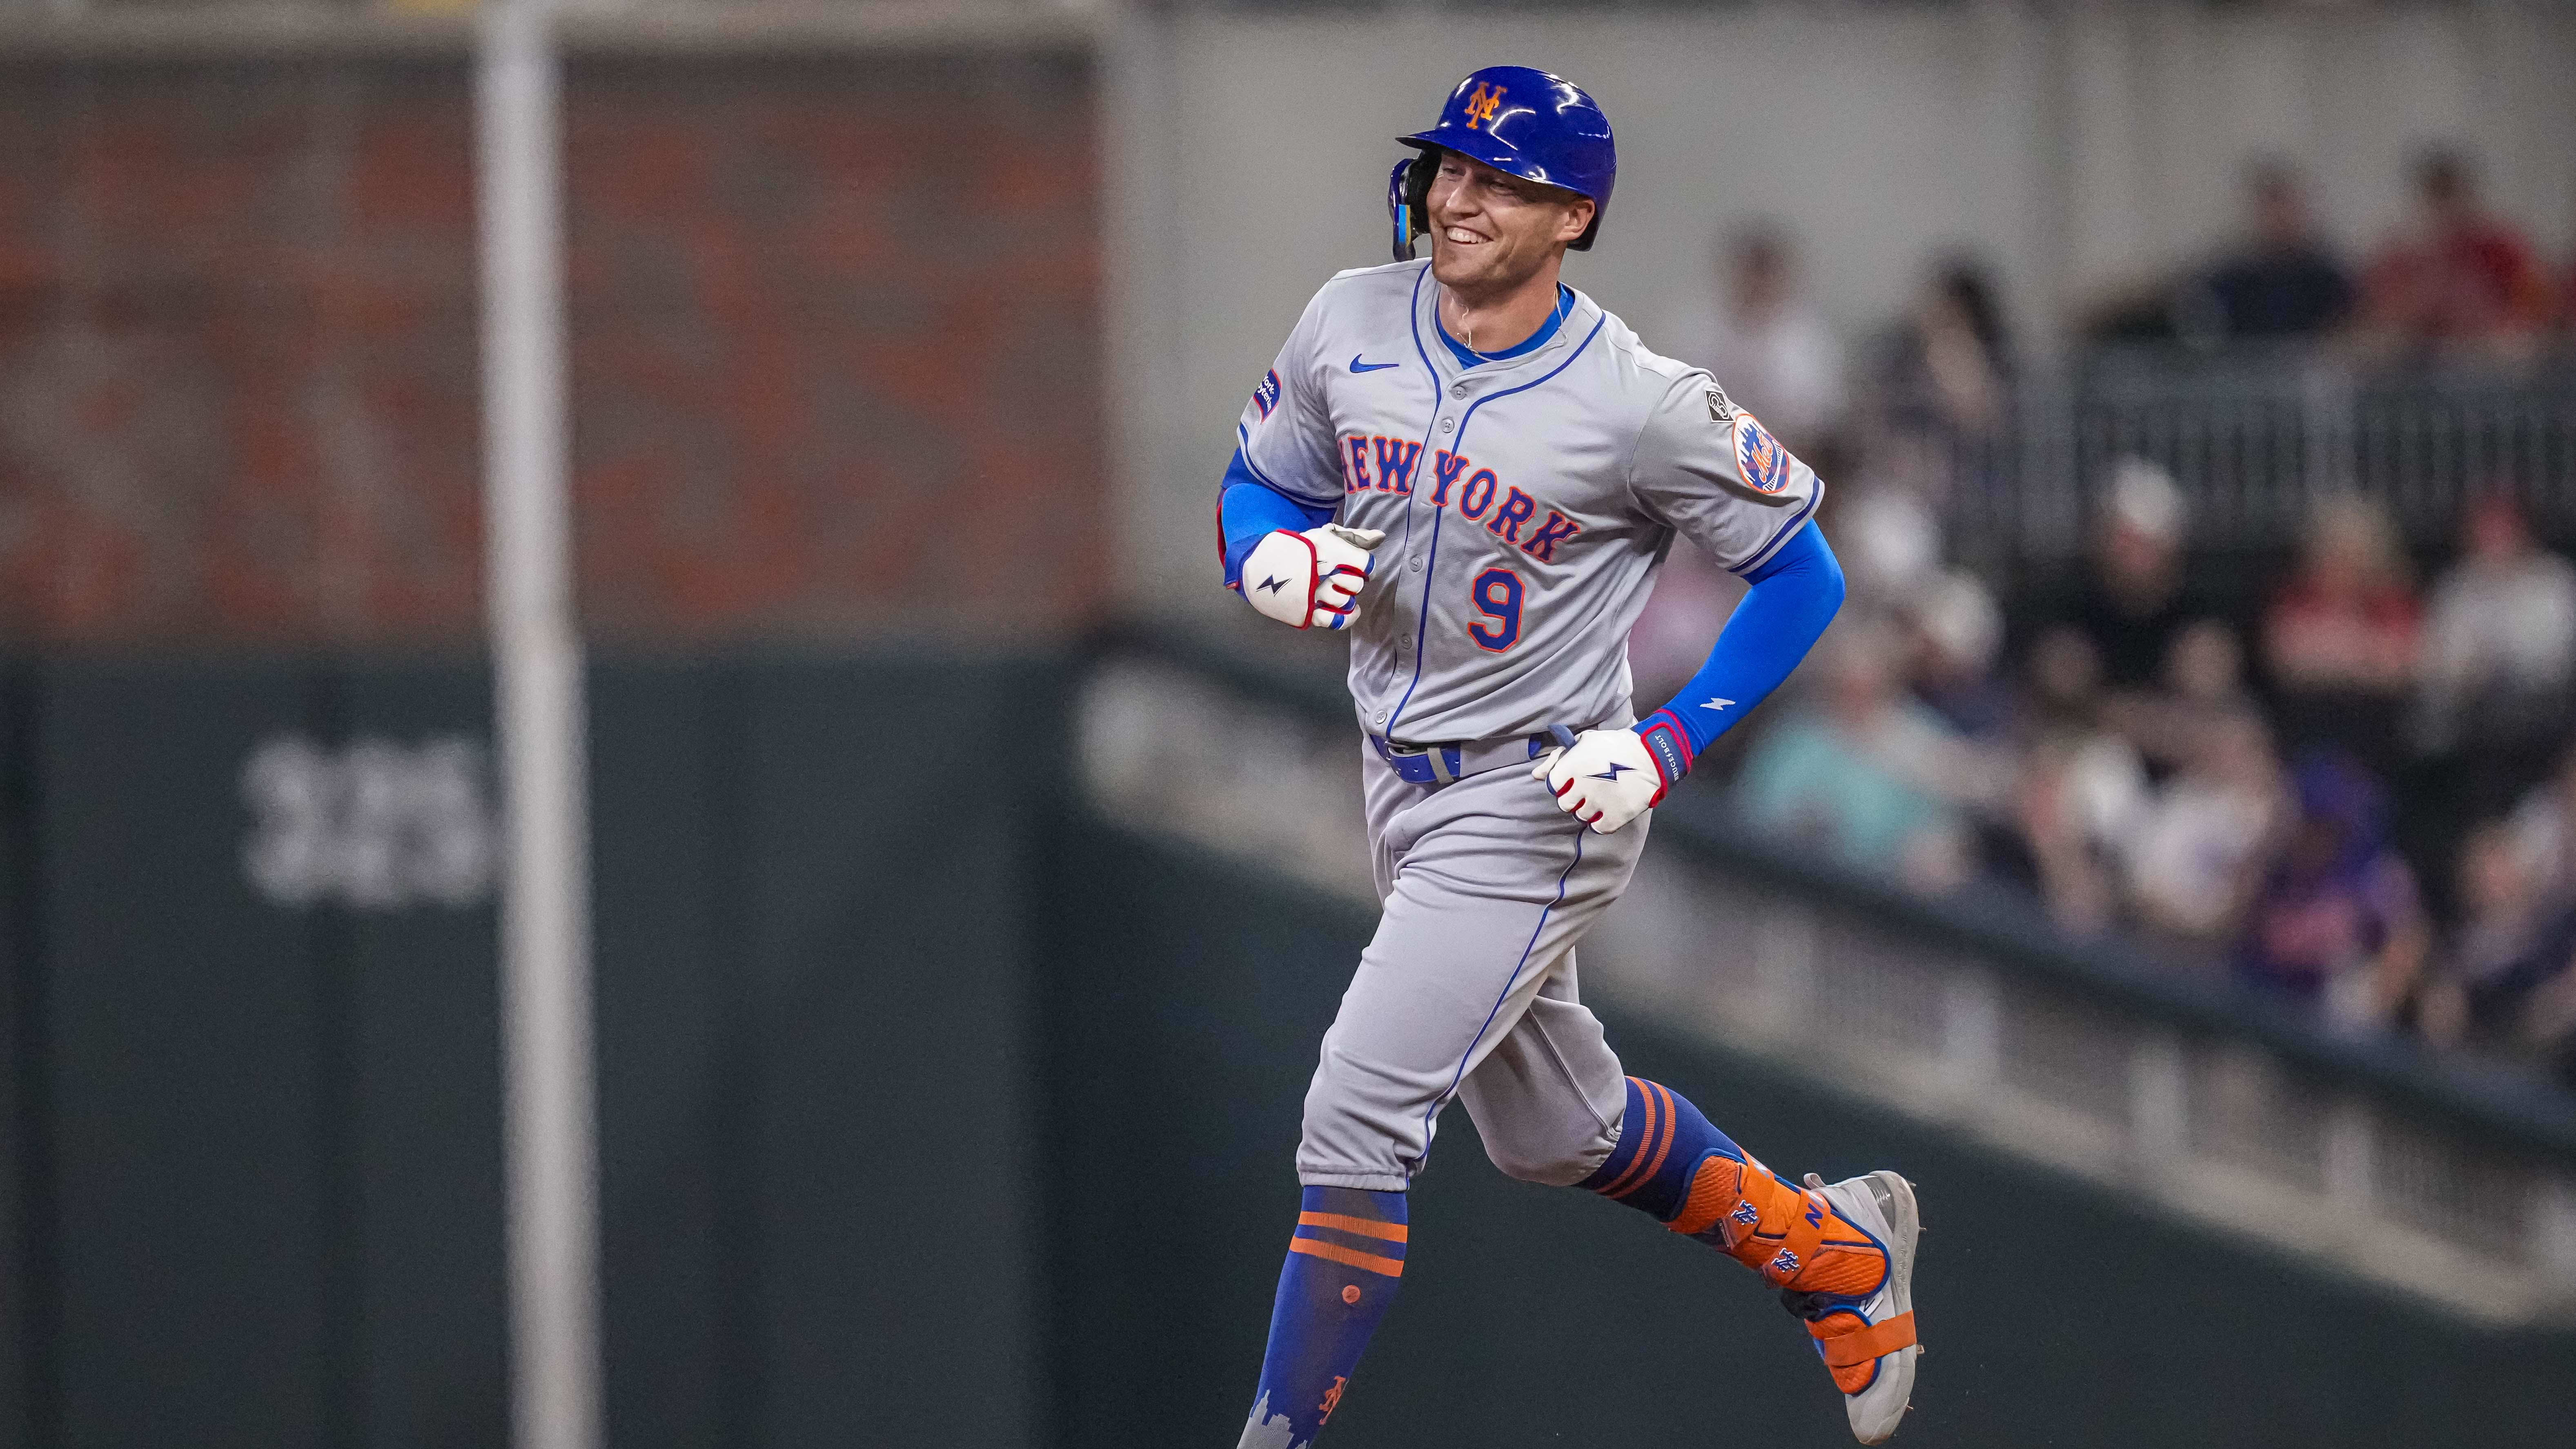 New York Mets center fielder Brandon Nimmo reacts after hitting his second home run of the game against the Atlanta Braves on Monday night.